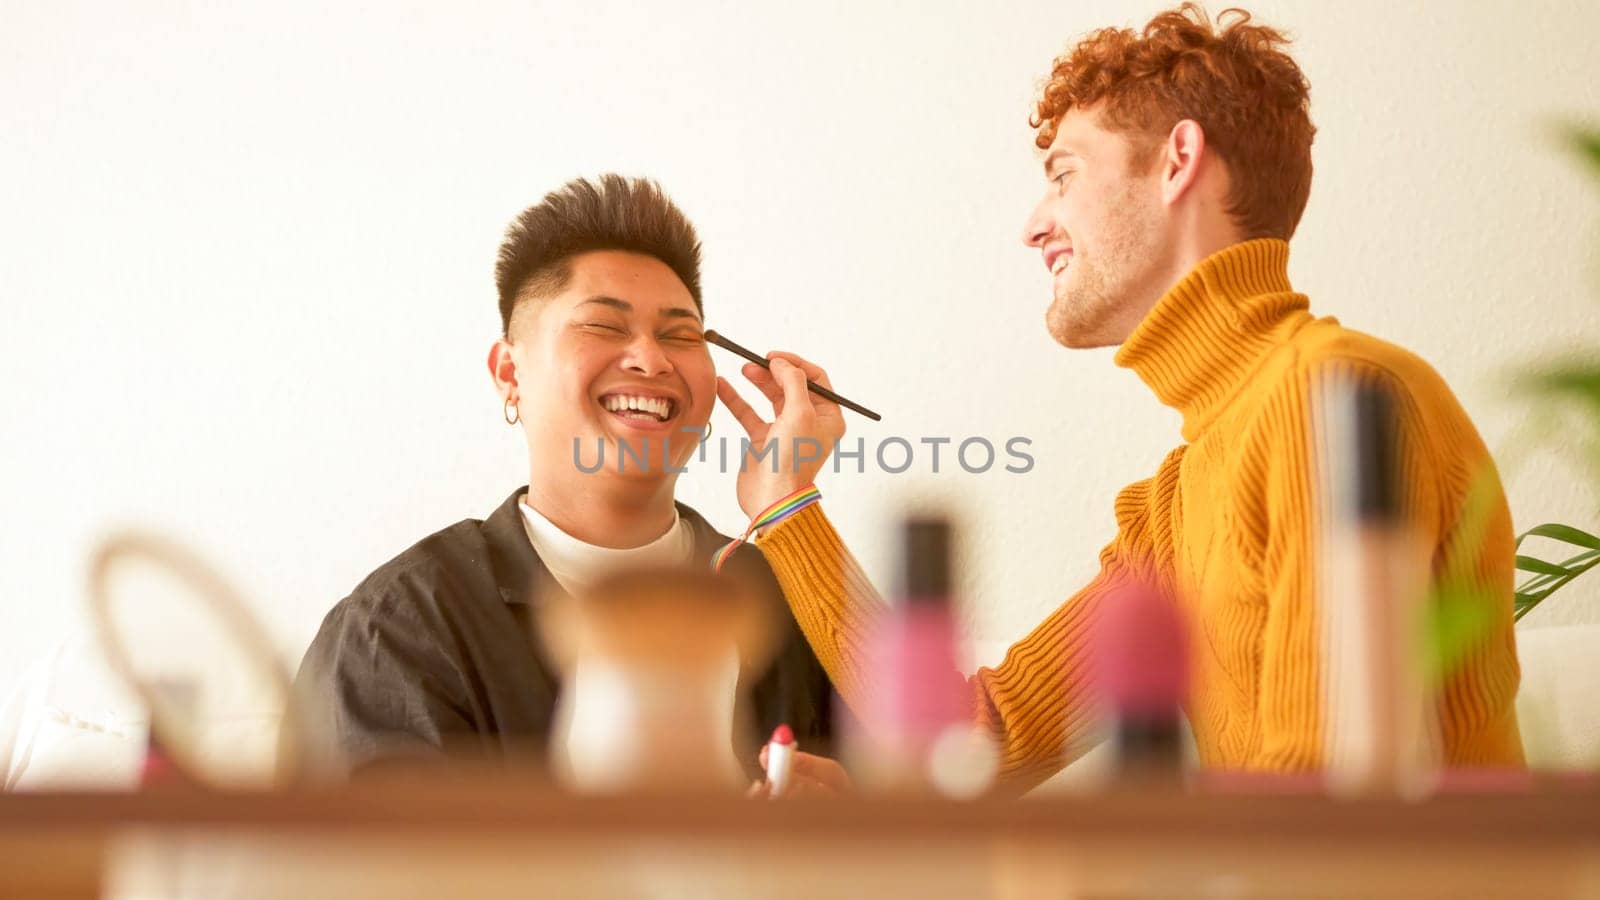 Some cosmetic on a shelf while gay couple applying make up